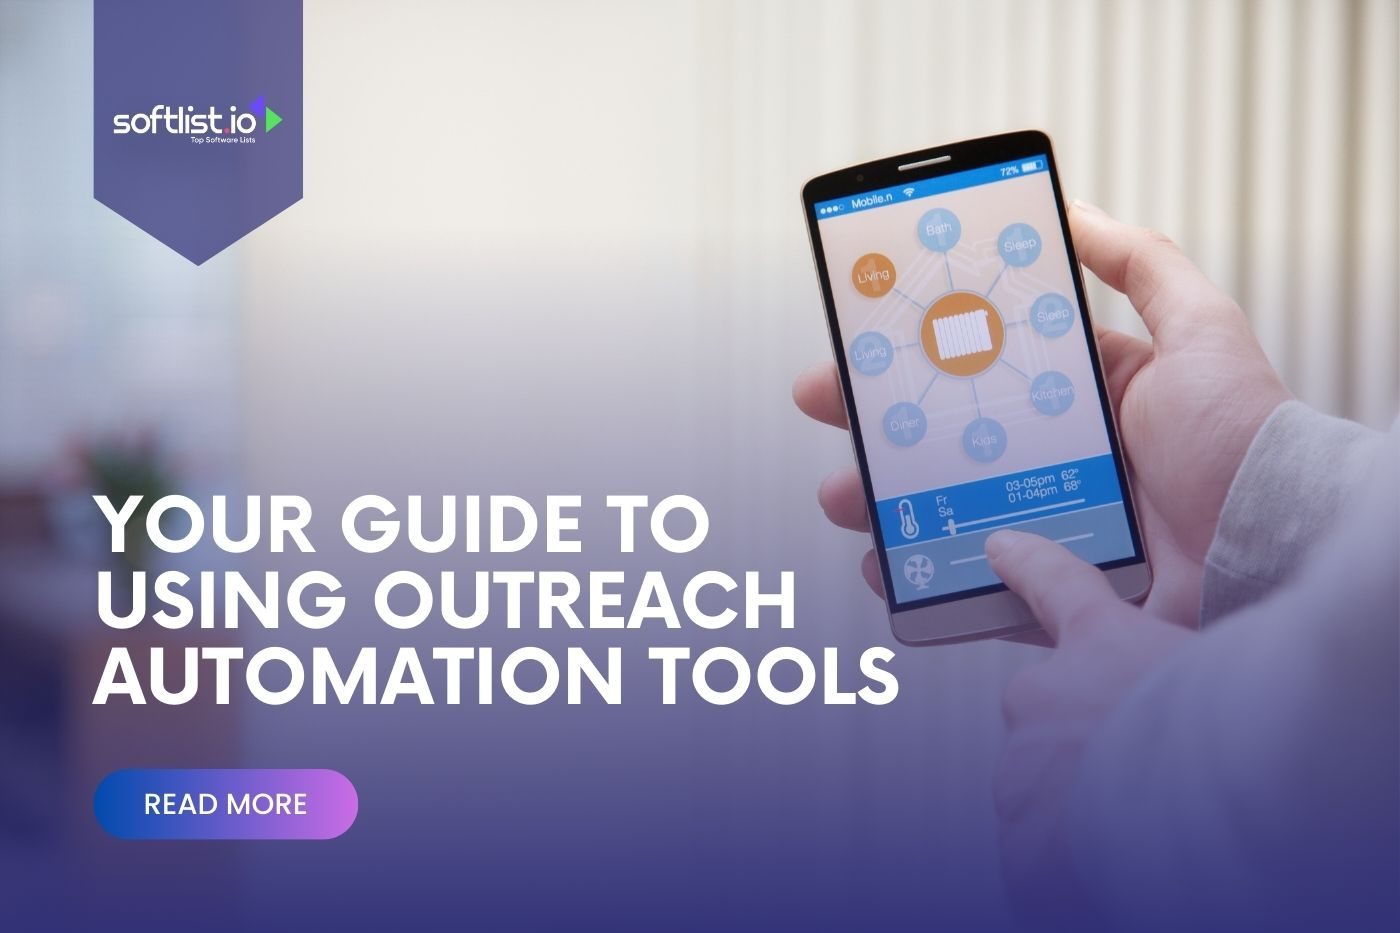 Your Guide to Using Outreach Automation Tools